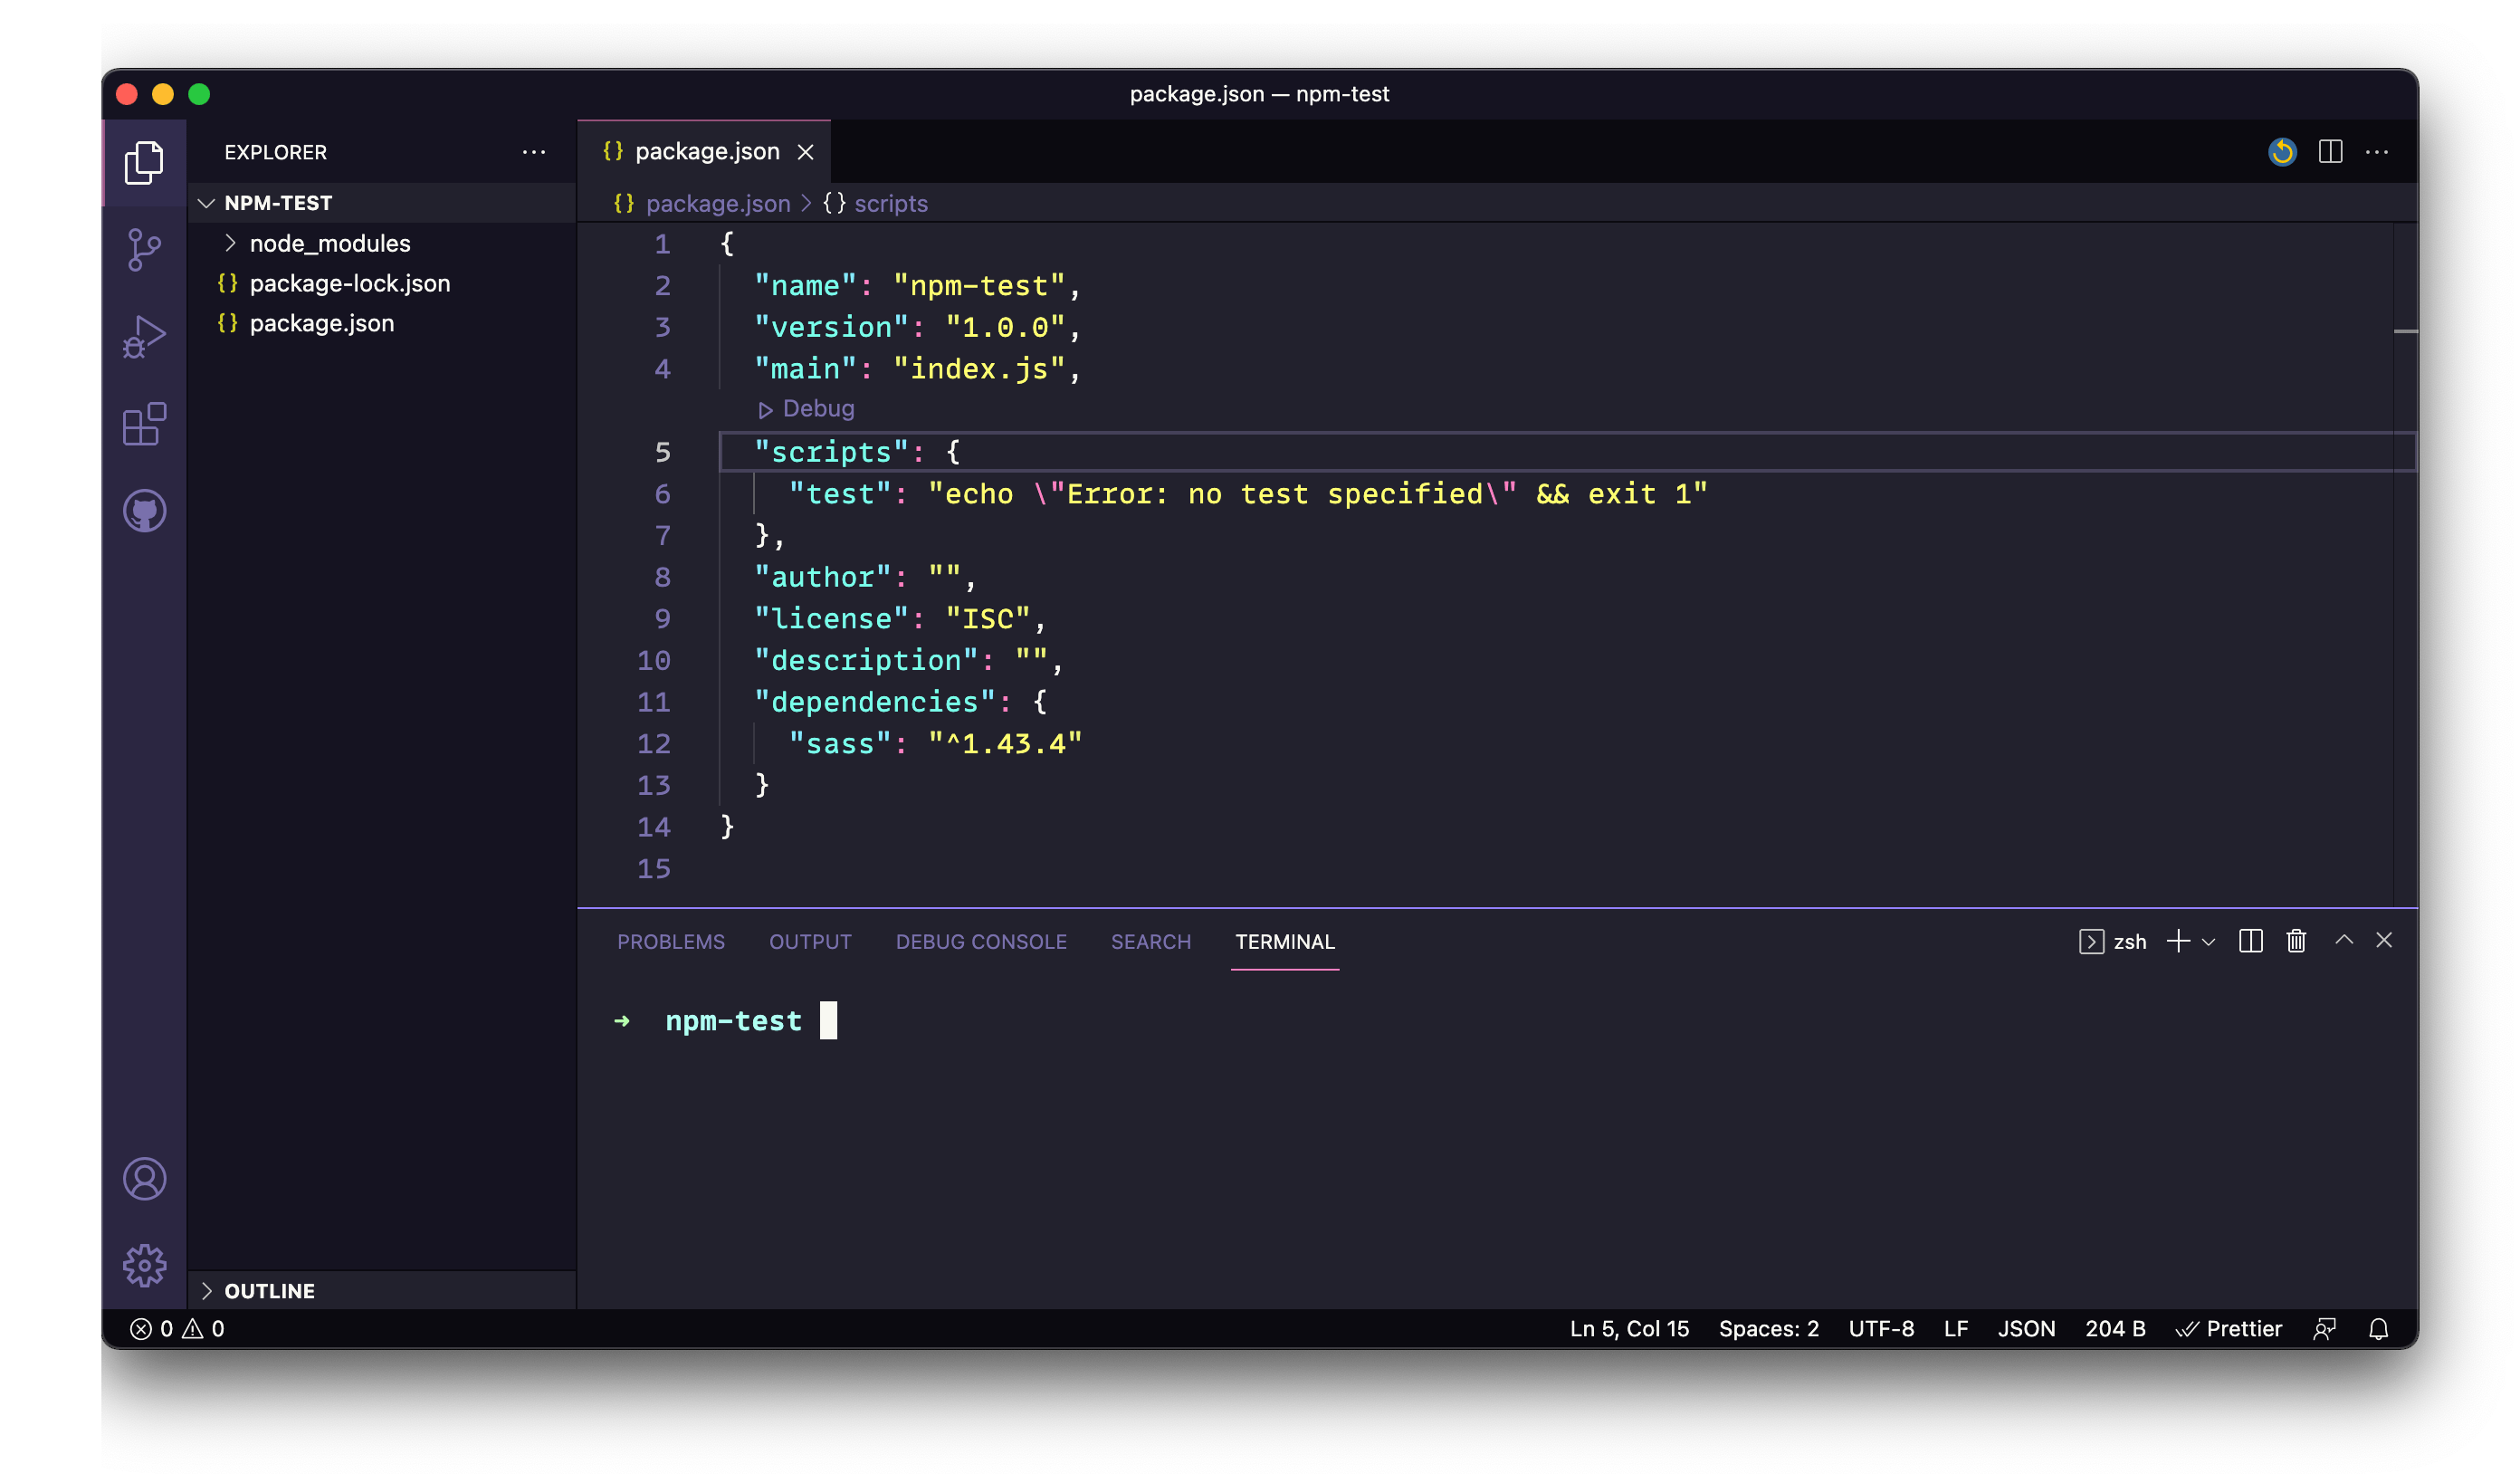 Screenshot of the VS Code editor with a package.json file open. The file contains the project name, npm-test, and includes a dependencies section that contains the Sass npm package.